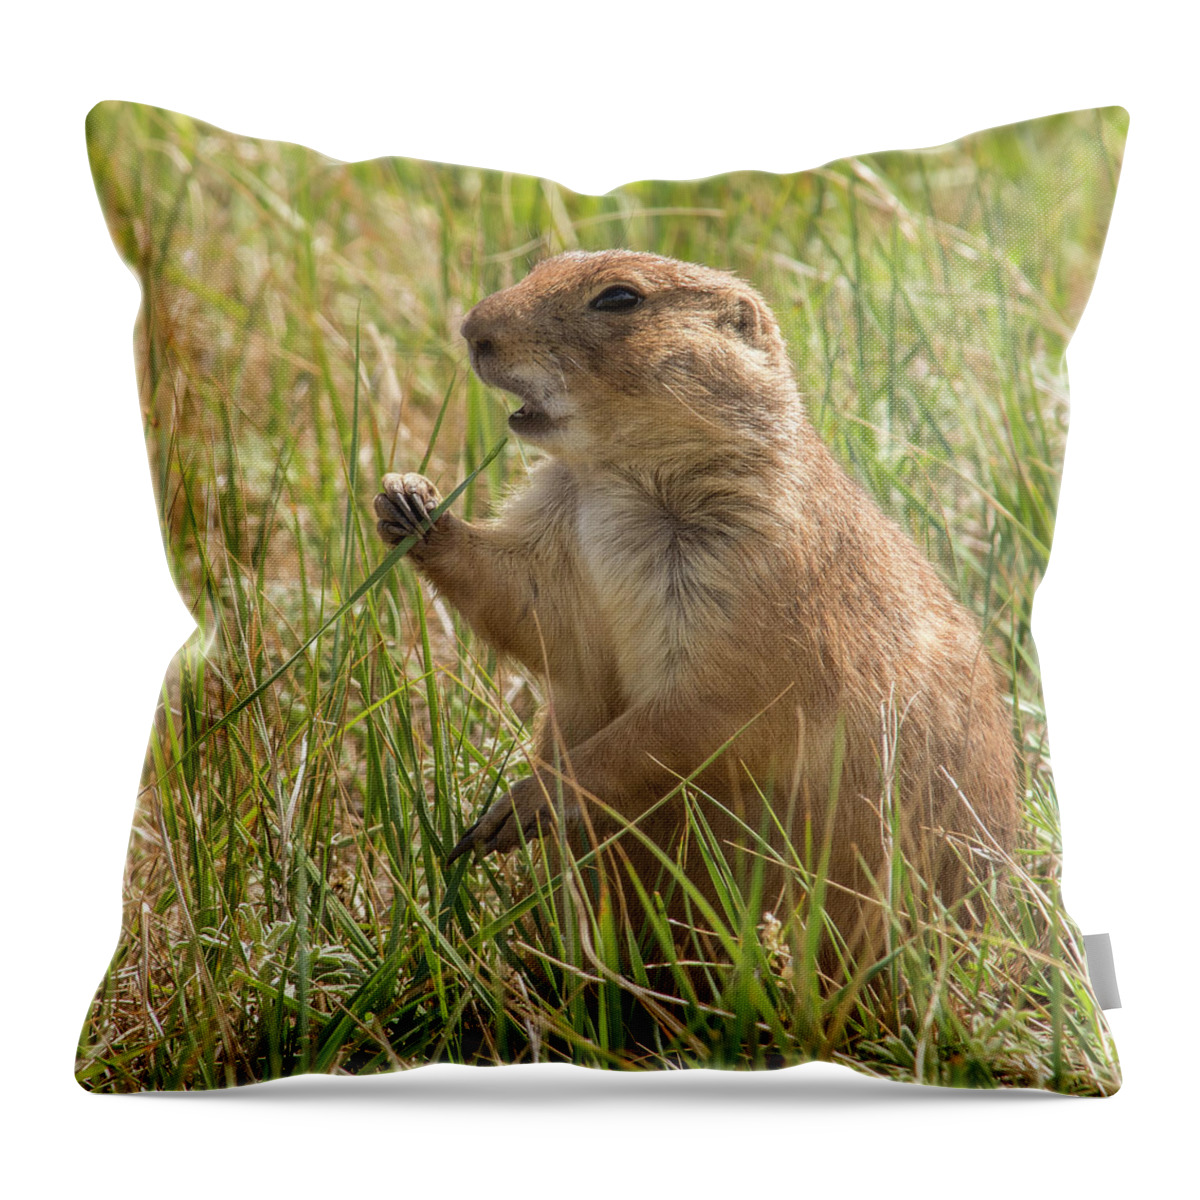 Animal Throw Pillow featuring the photograph Prairie Dog by Brenda Jacobs